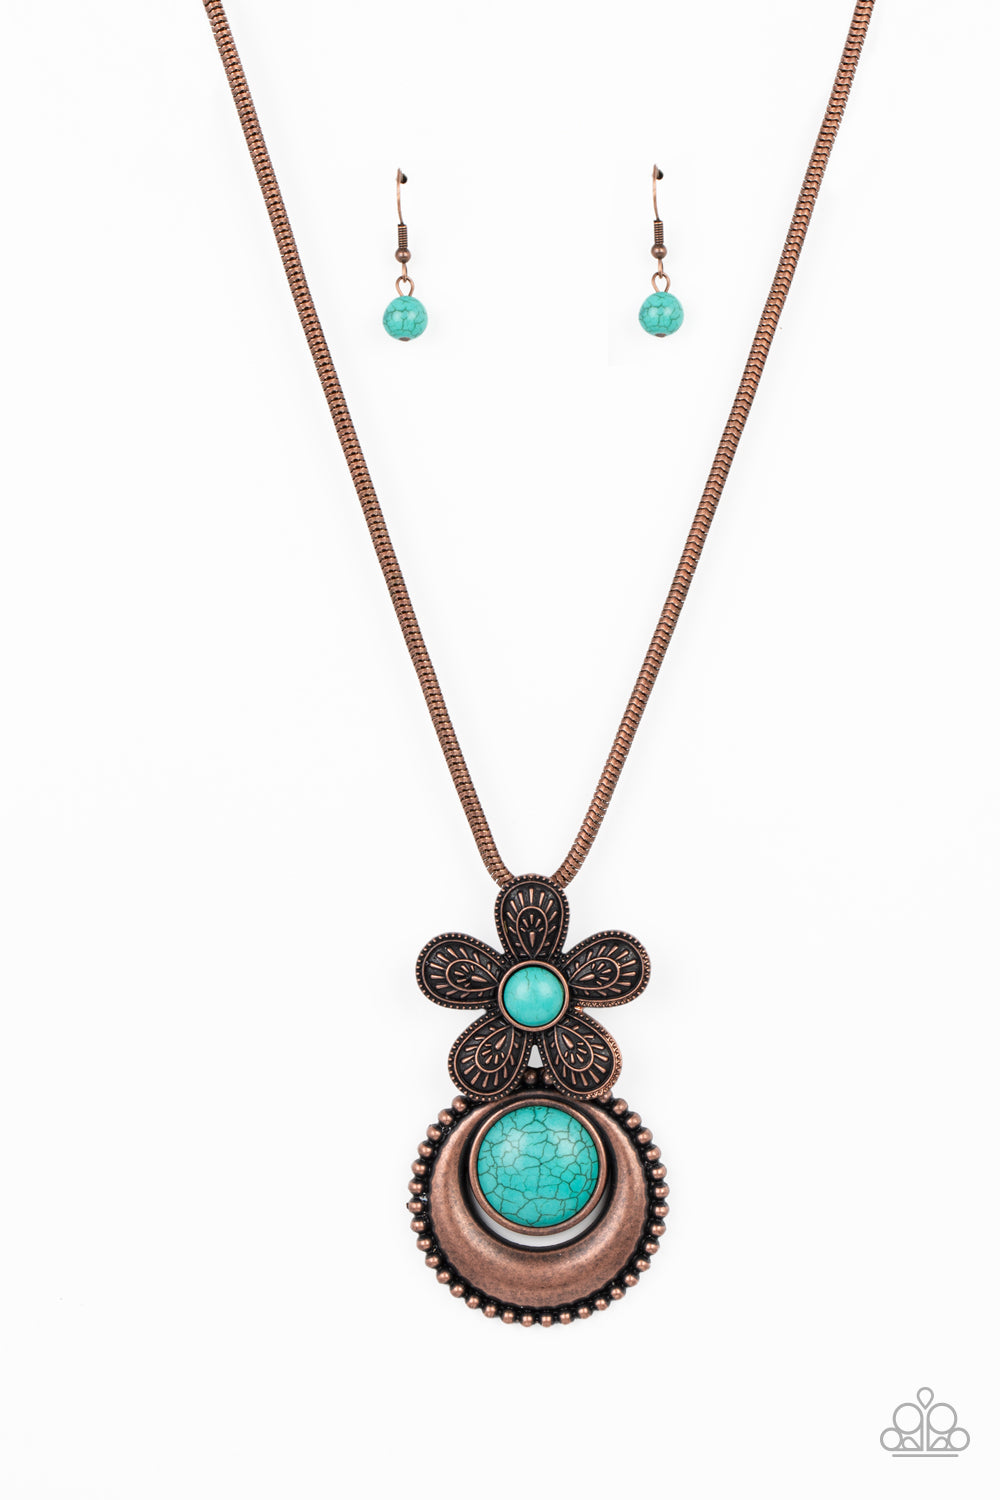 Paparazzi Accessories - Bohemian Blossom fluttering from a copper snake chain, an oversized flower with detailed petals blooms around a turquoise stone center. A copper pendant with a studded border swings from the single flower for additional movement. A refreshing oversized stone in the same hue is pressed into the center of the pendant for a pop of color amongst the metallic texture. Features an adjustable clasp closure. As the stone elements in this piece are natural, some color variation is normal.